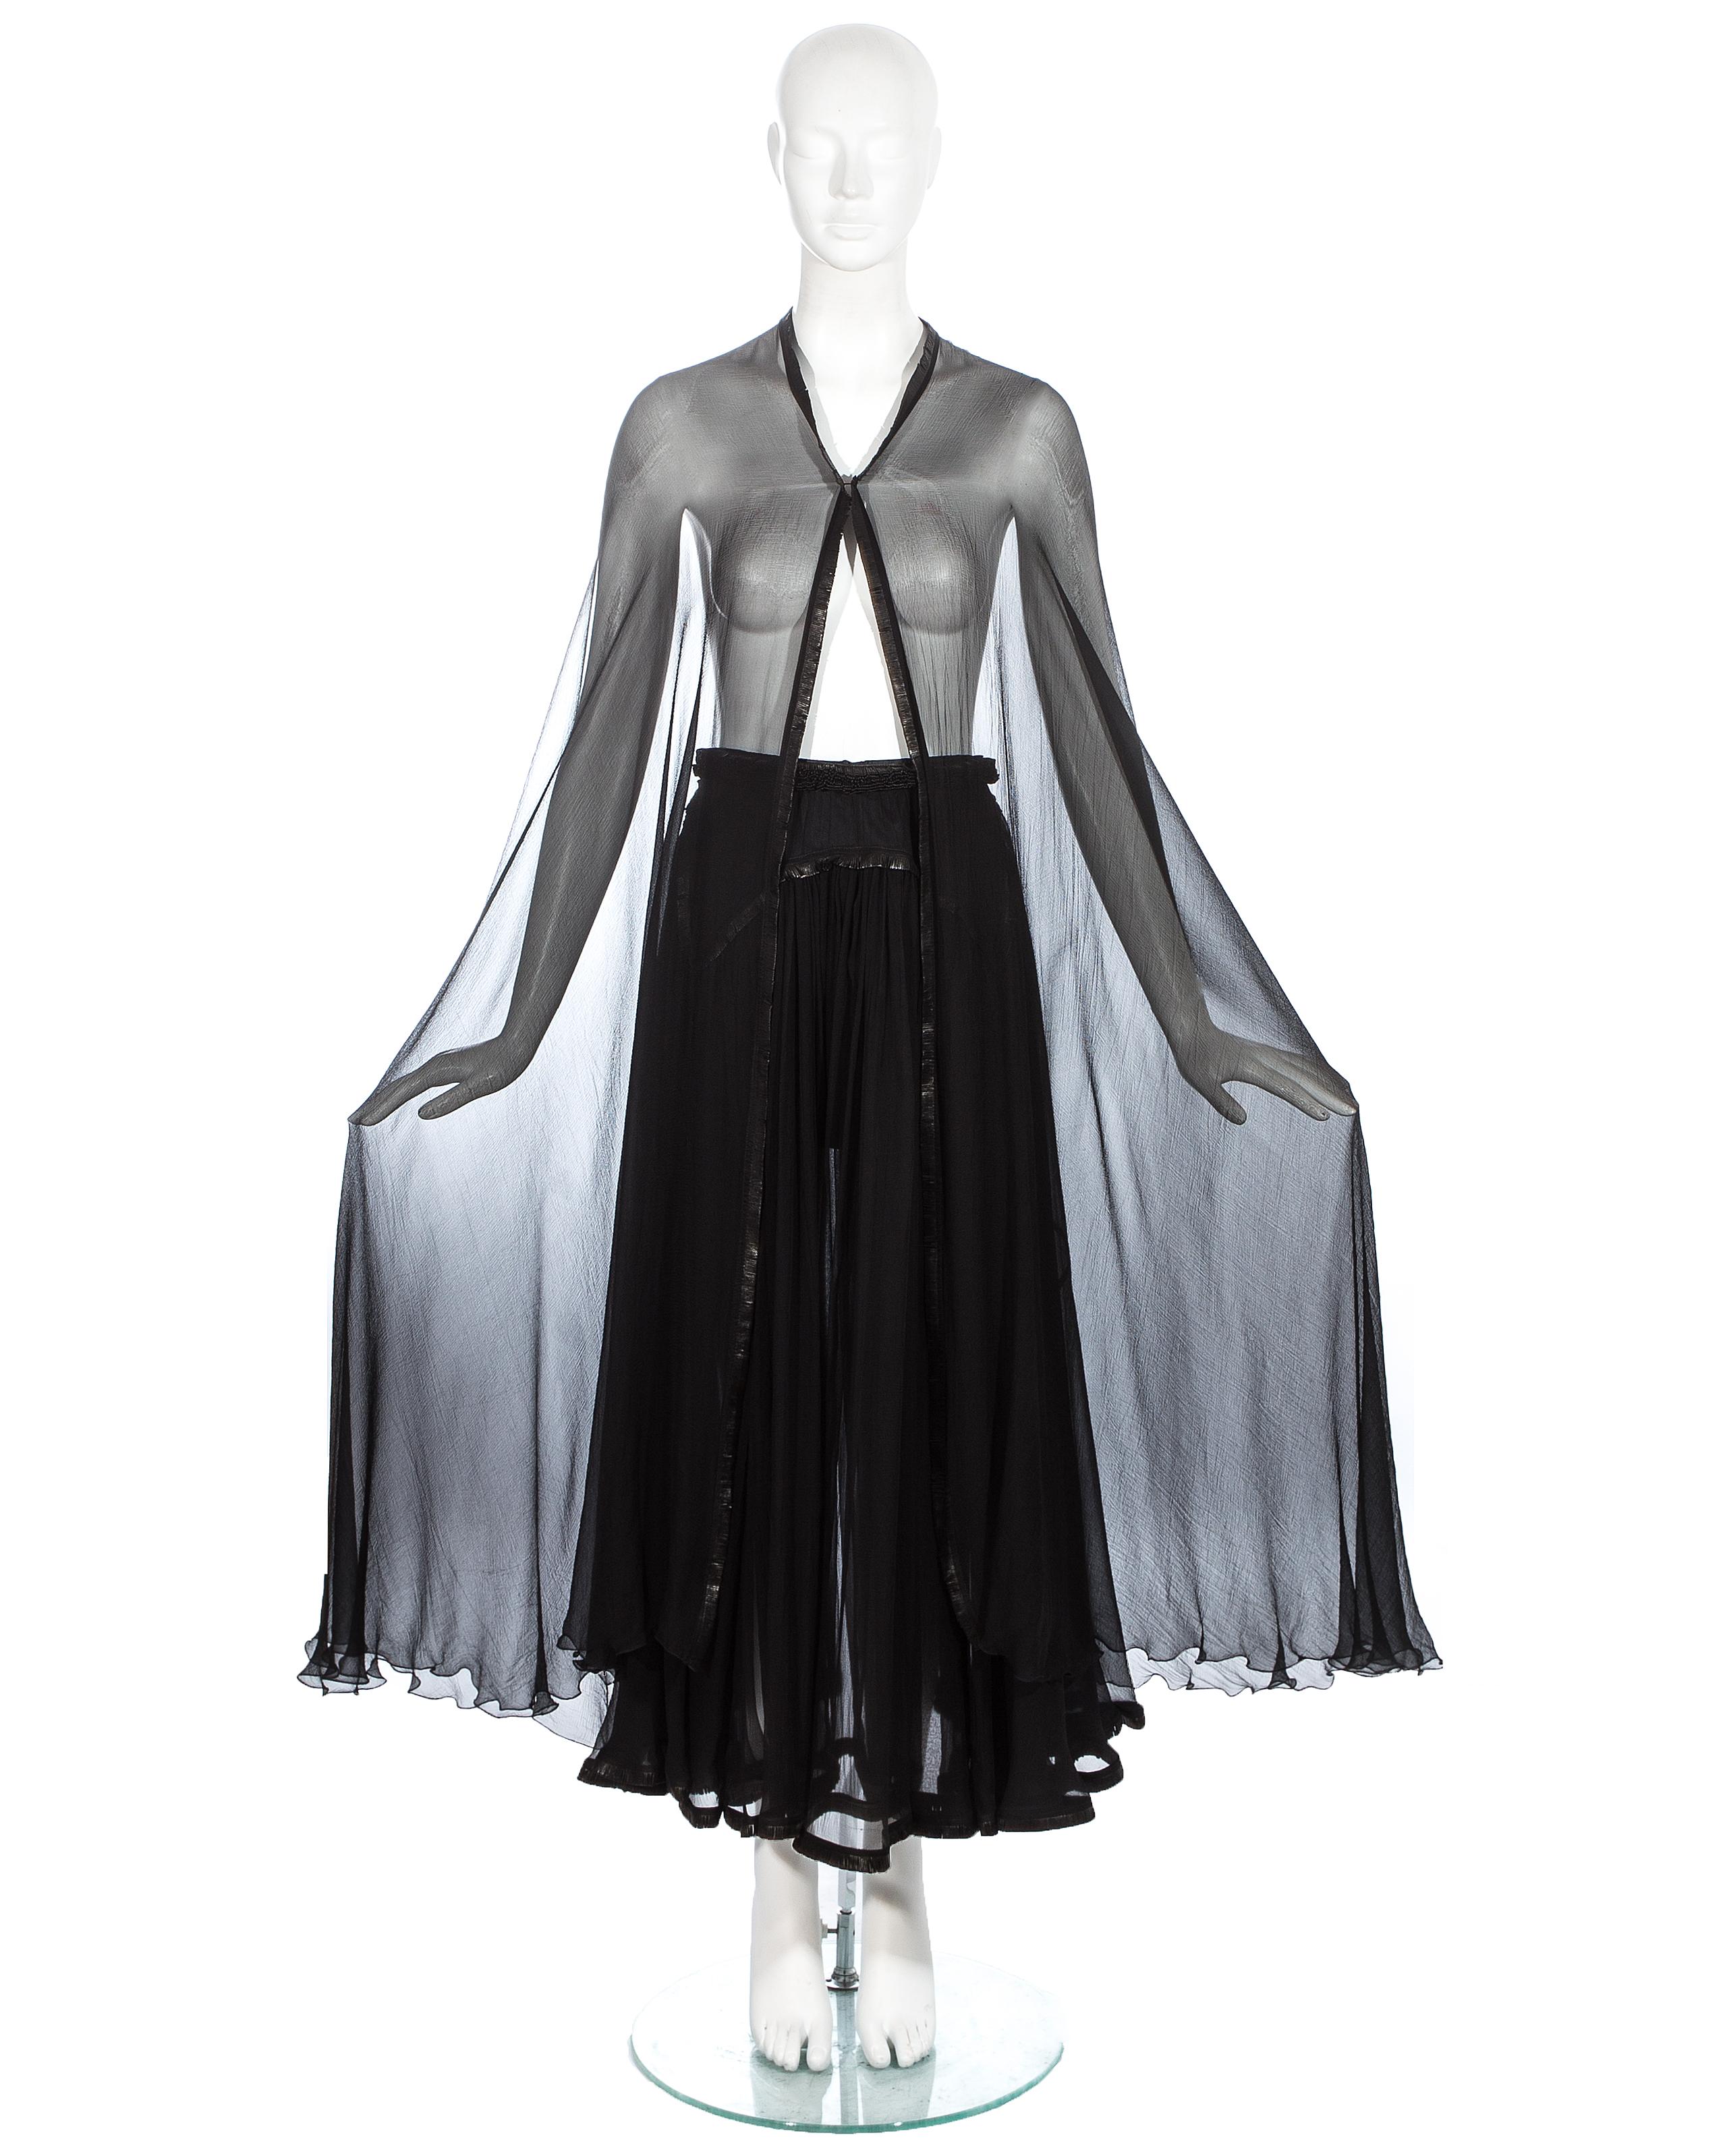 Azzedine Alaia couture black silk chiffon cape and skirt with leather fringed trim. Comes with silk shorts to wear underneath. 

c. 1994